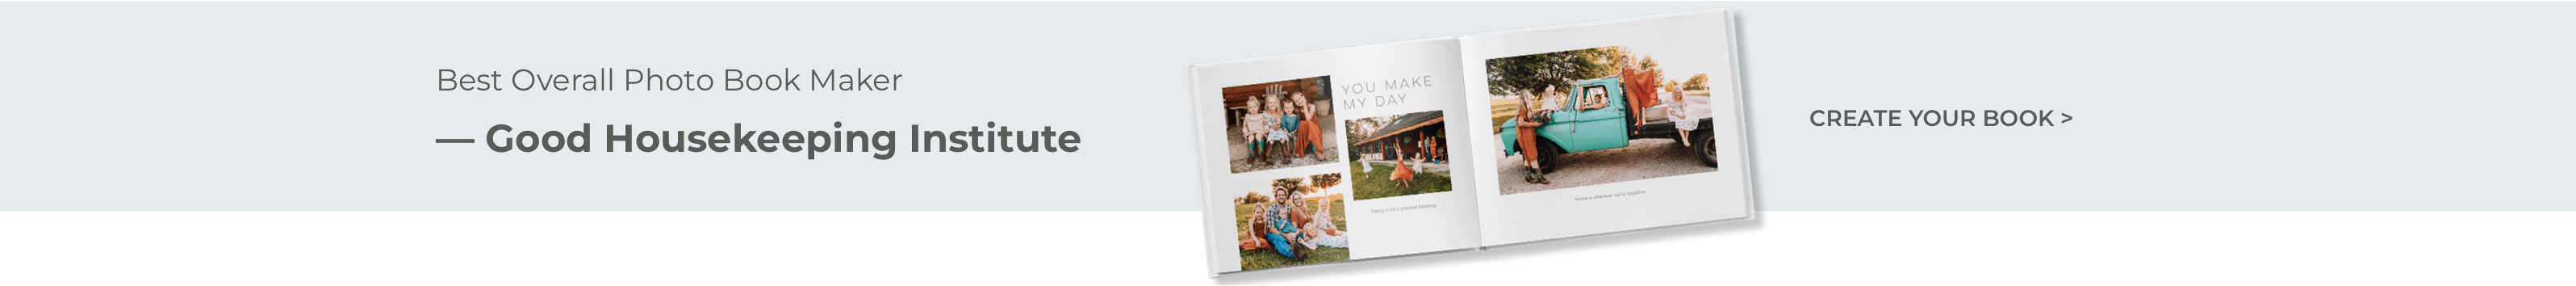 Comparing our 9 favorite custom photo book services to help you decide